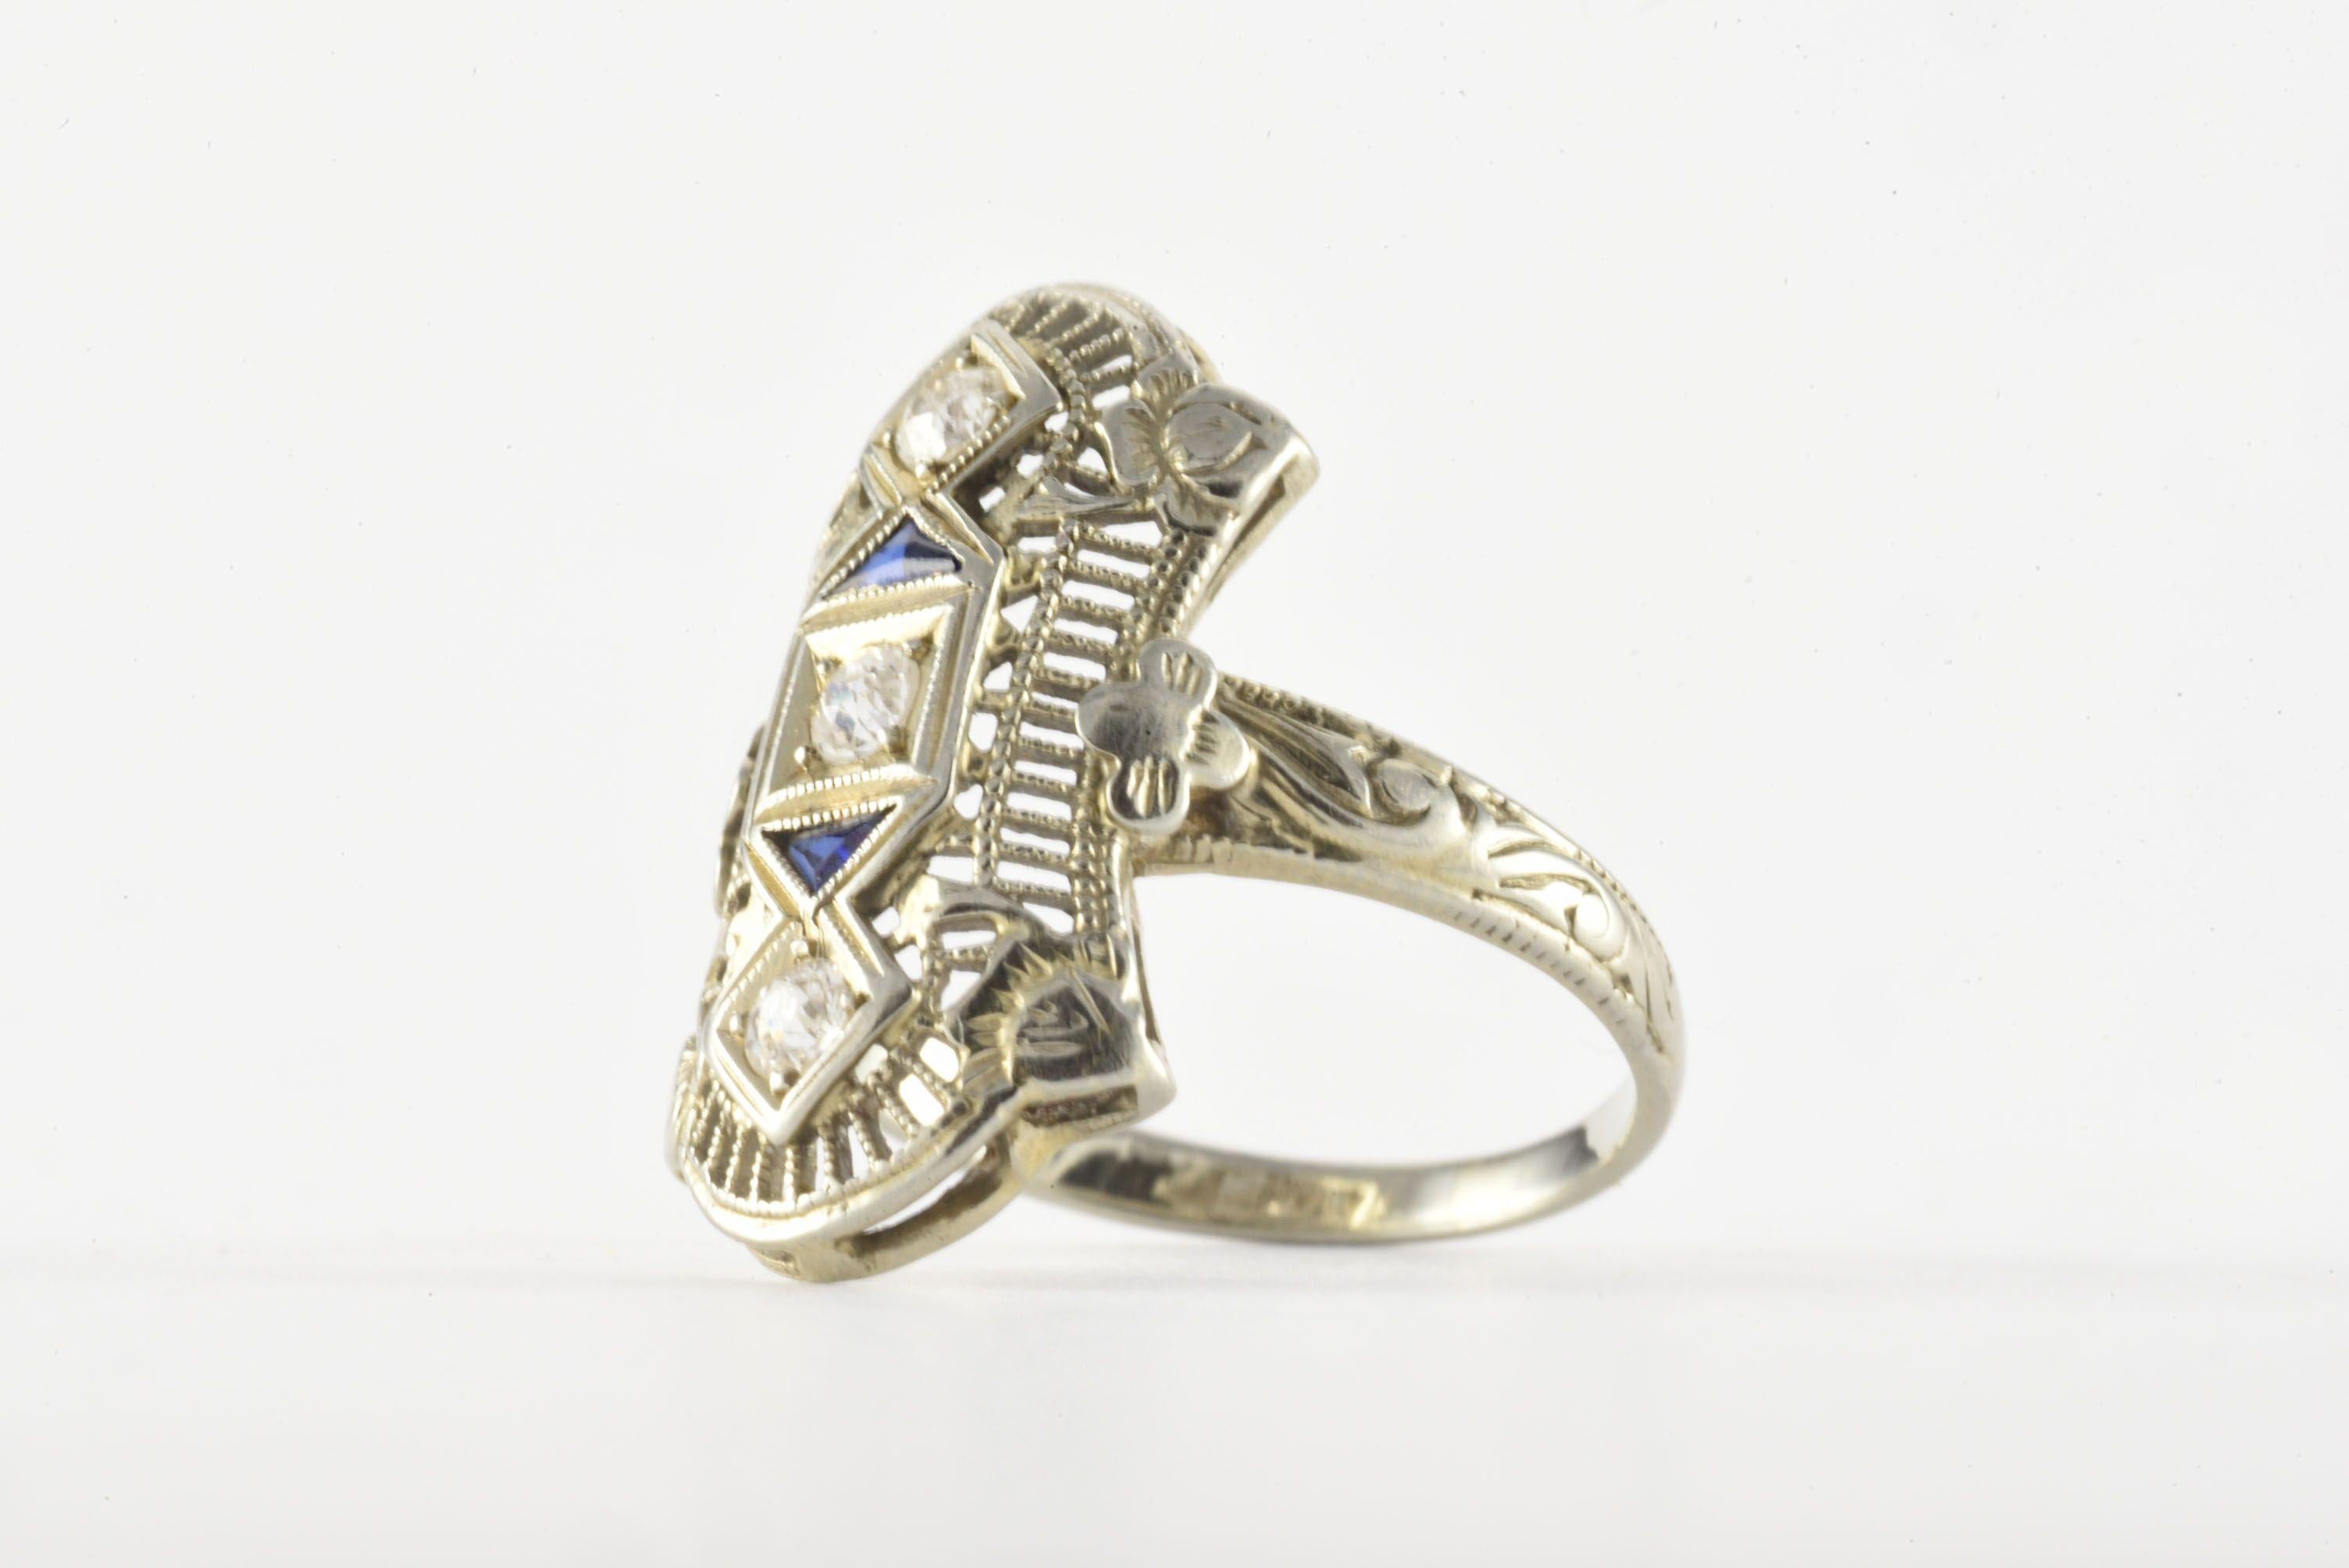 Crafted in the 1920s, this Art Deco Navette-shaped band fashioned from 18kt white gold features a trio of Old European cut diamonds, G-H color, VS-SI clarity, totaling approximately 0.15 carats and accented by two trillion-shaped blue sapphires and